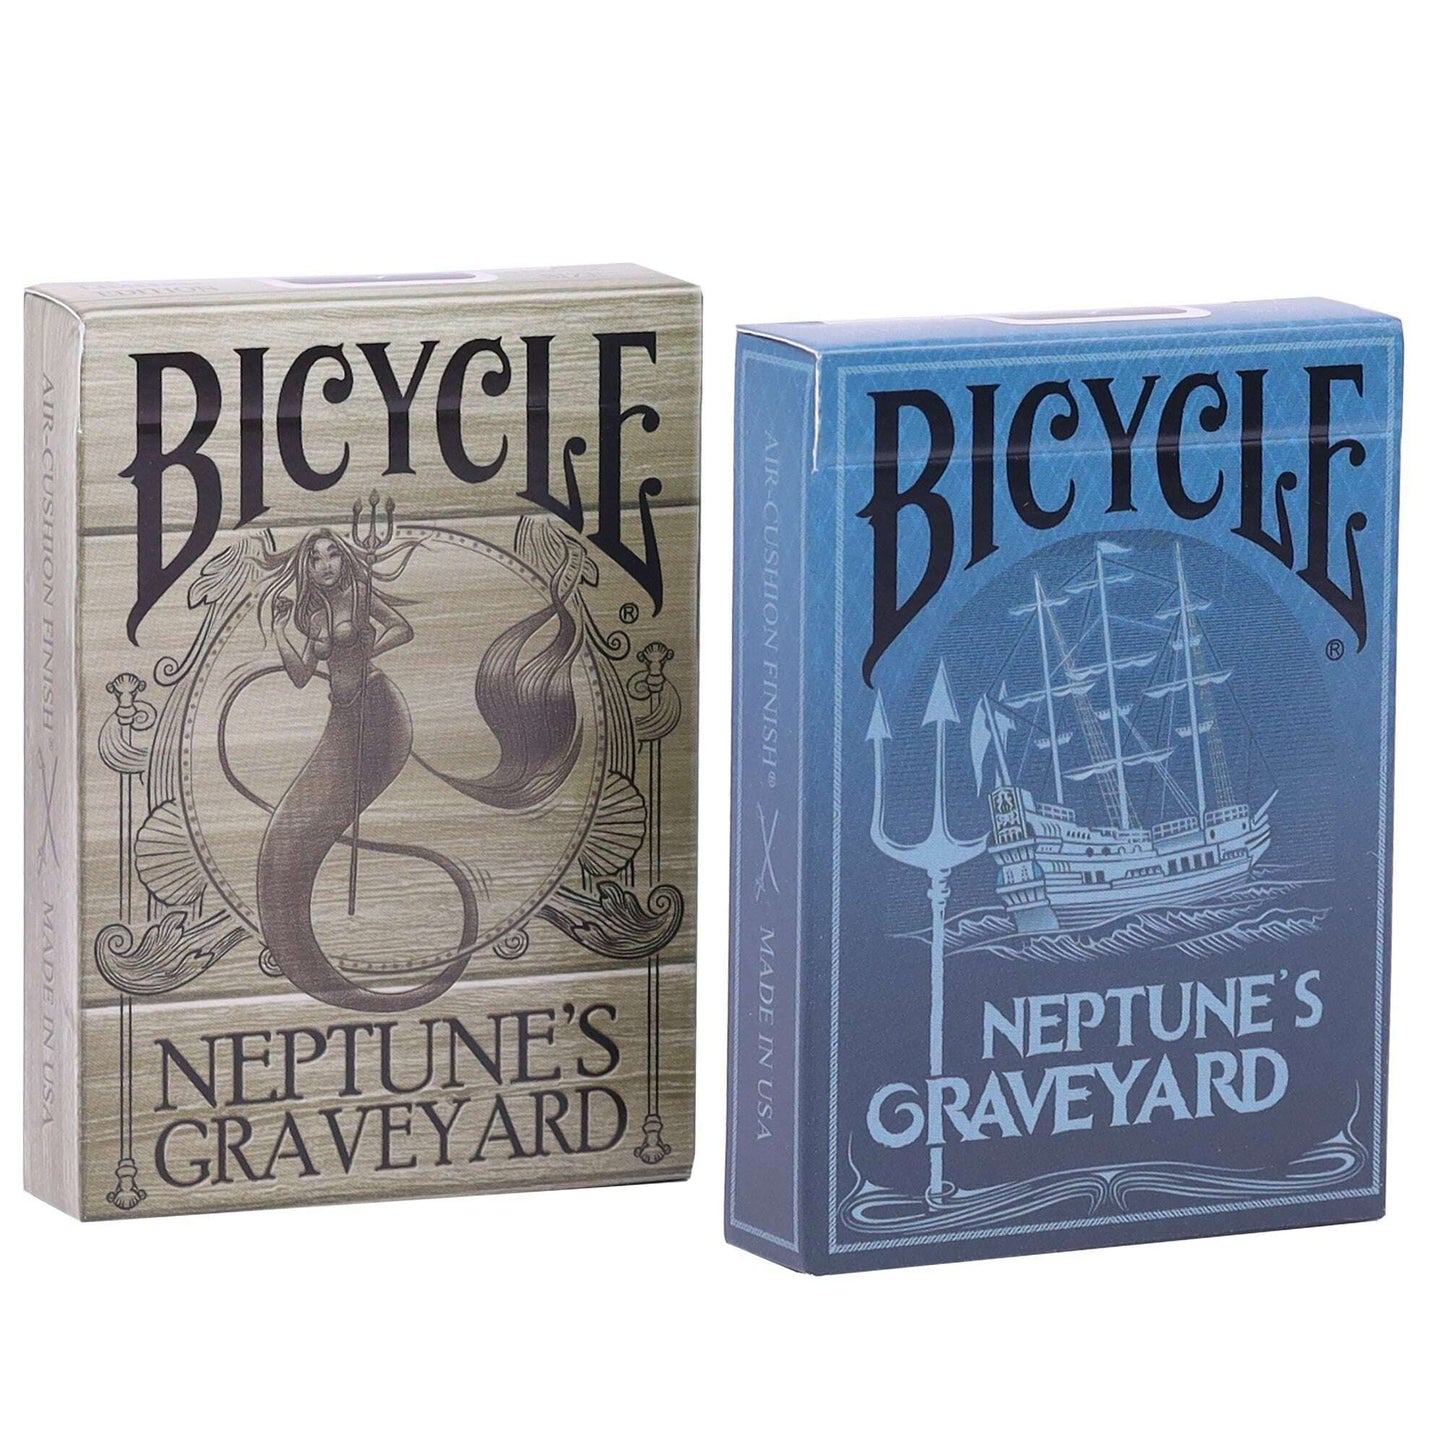 PlayingCardDecks.com-Neptune's Graveyard Gilded Bicycle Playing Cards: Two-Deck Set